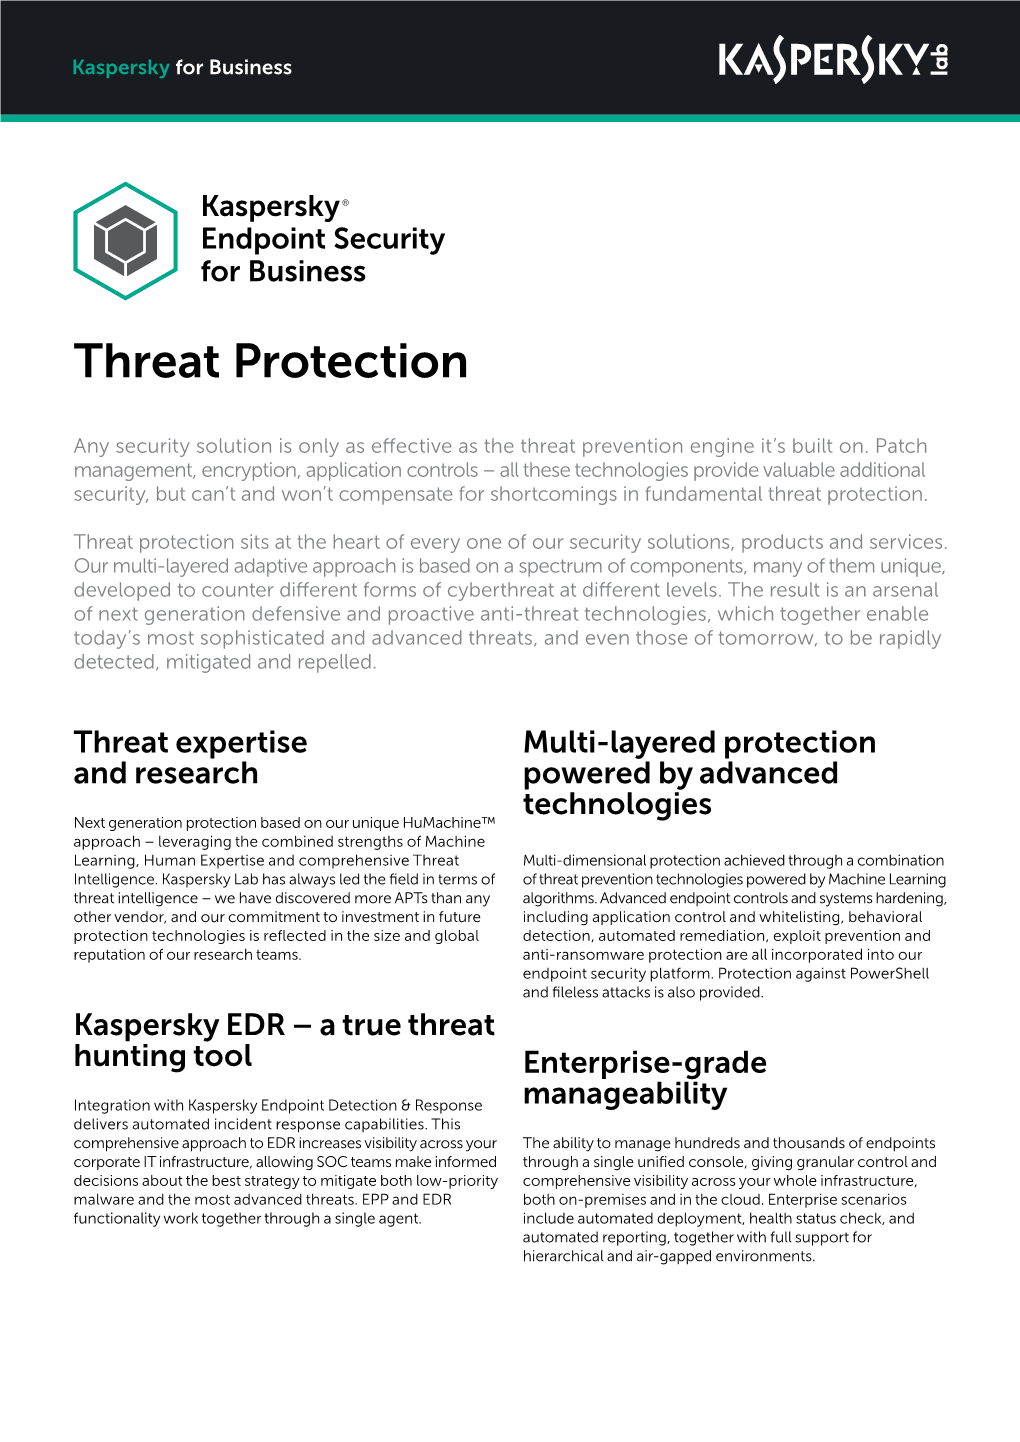 Threat Protection